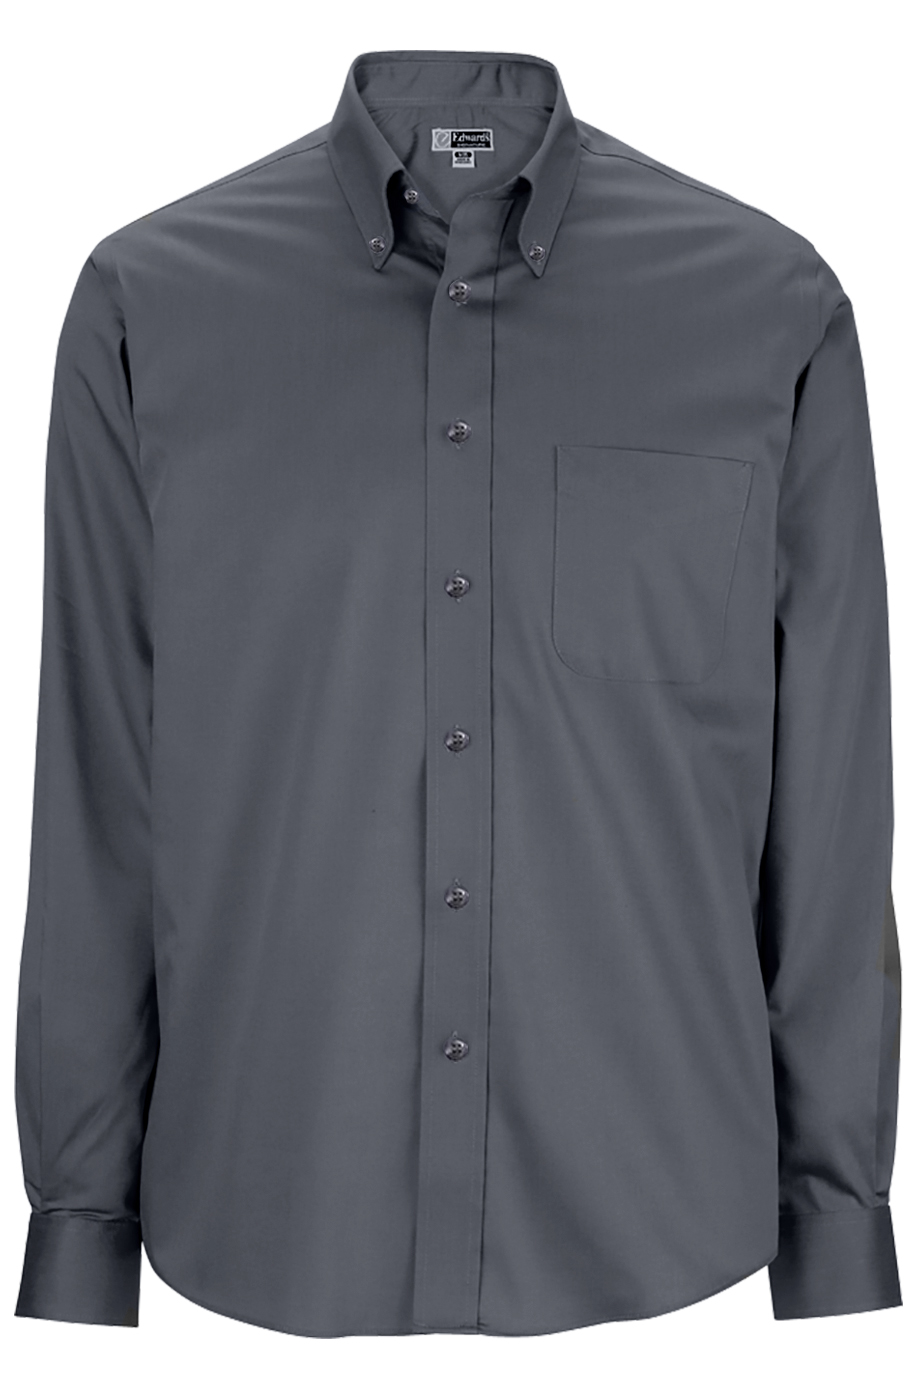 Look Professional and Put Together with a Super elastic wrinkle free shirt post thumbnail image